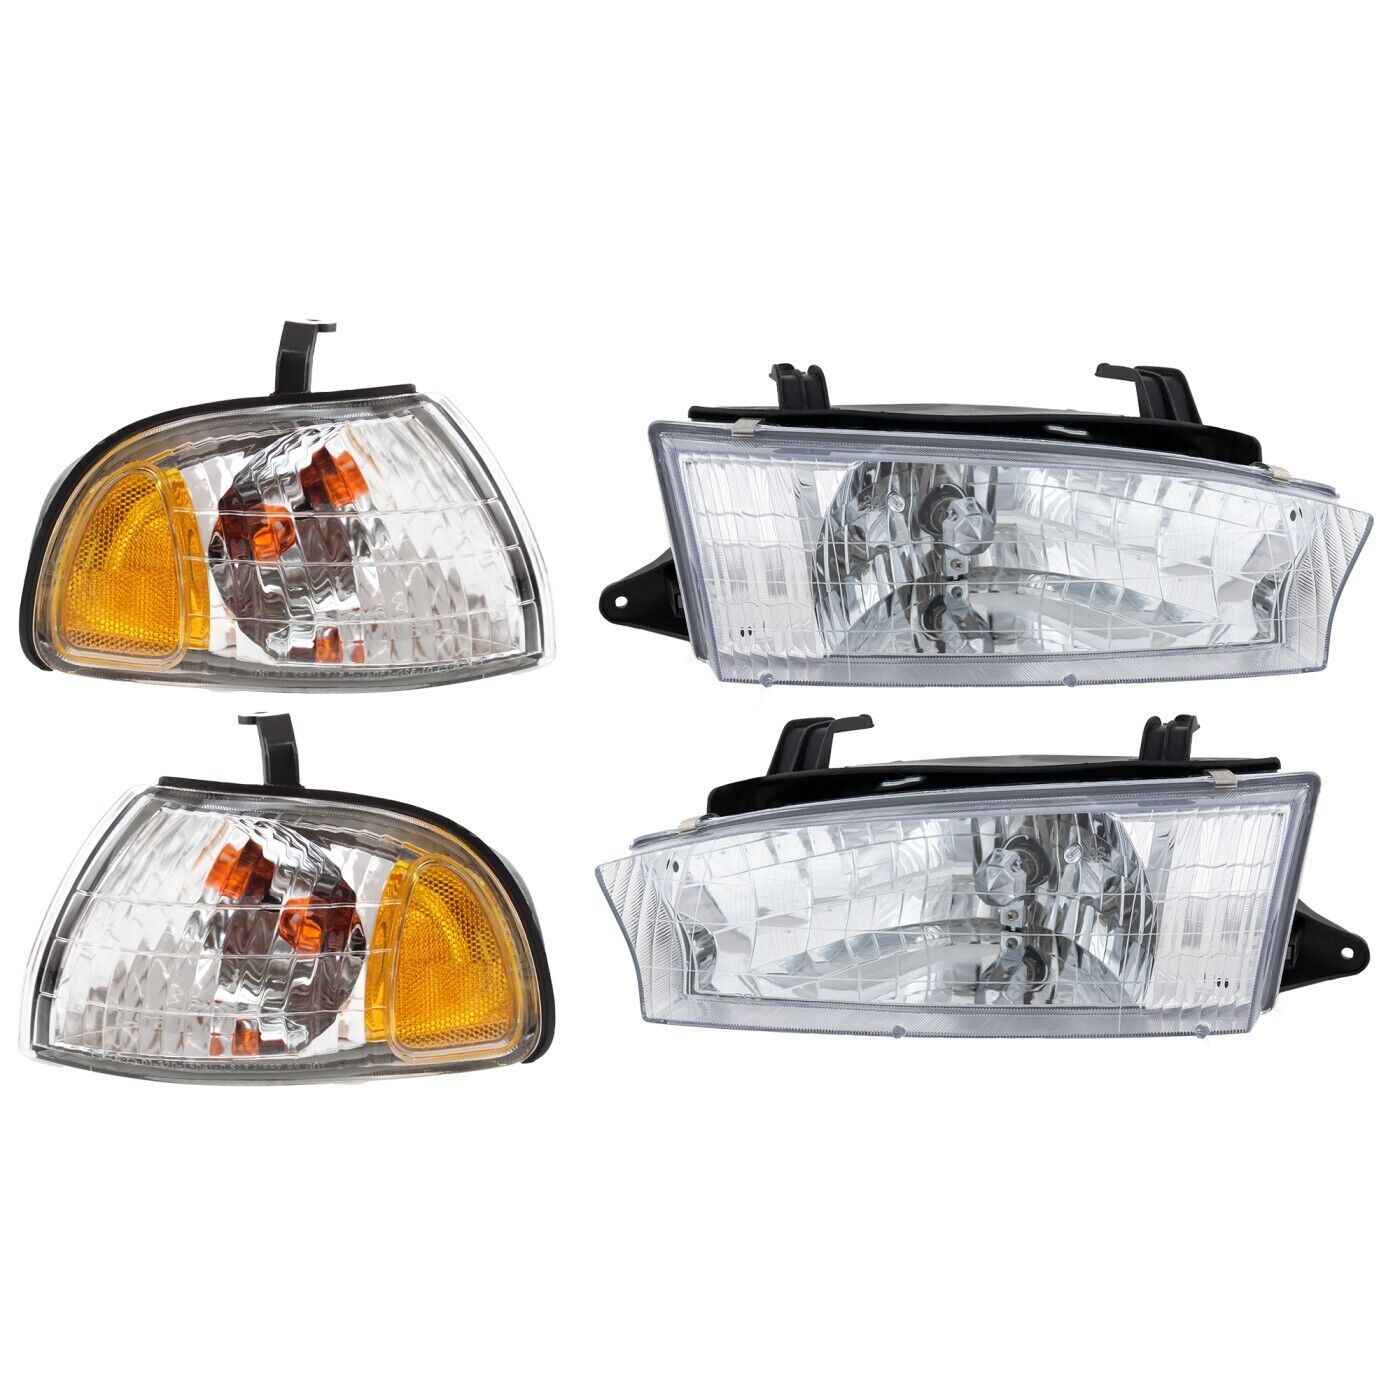 Headlight Kit For 1997-1999 Subaru Legacy Driver and Passenger Side Clear Lens